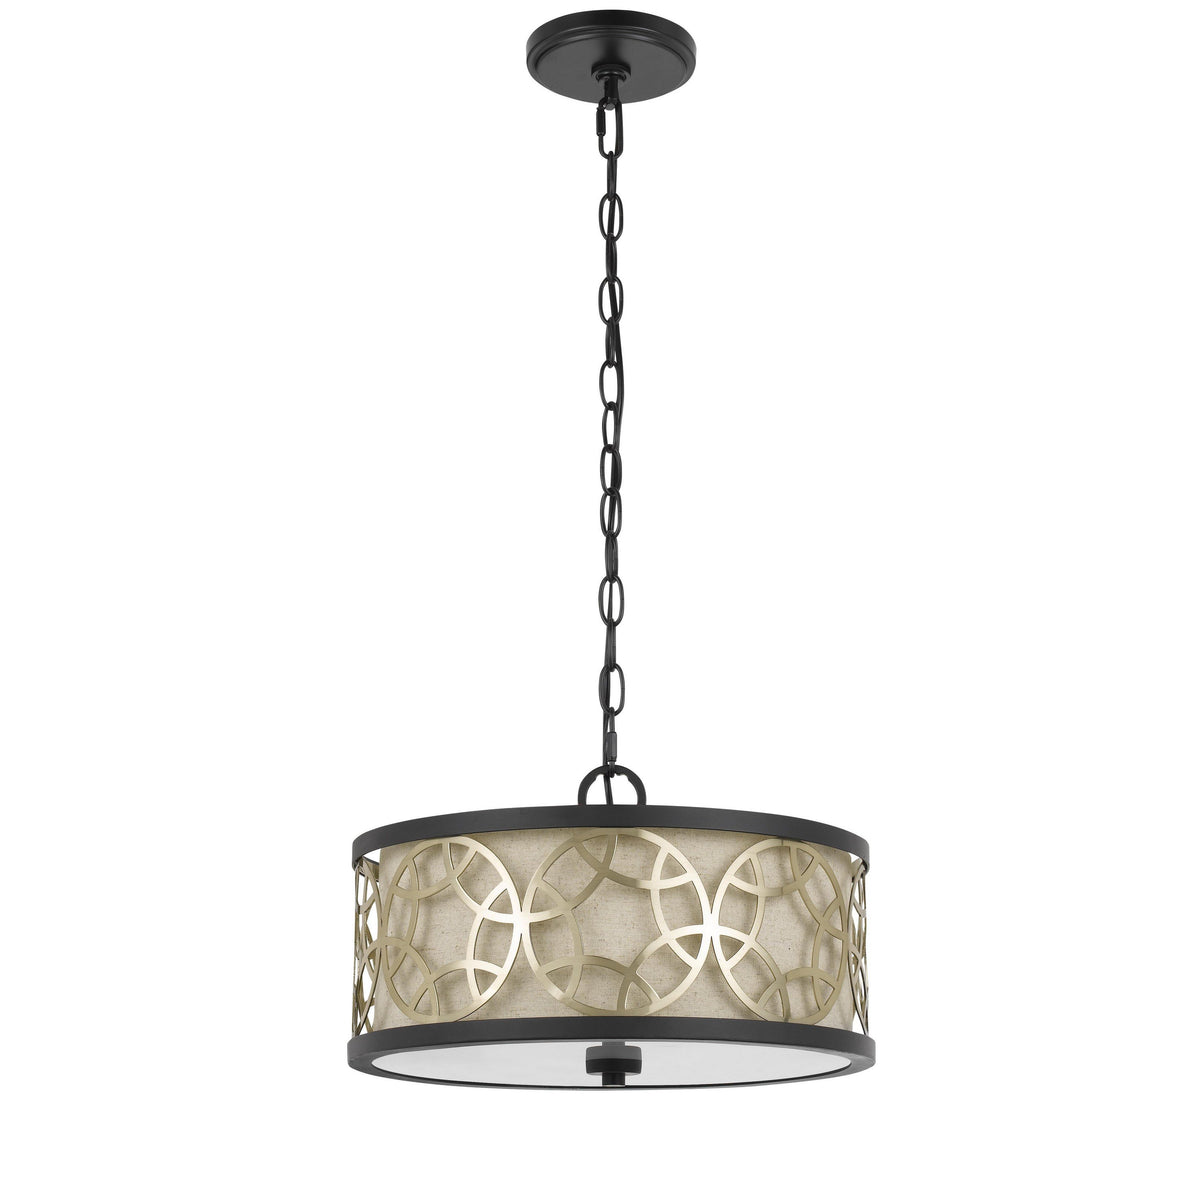 Cylindrical Drum Pendant Chandelier with Lattice Design, Black and Brass - BM224827